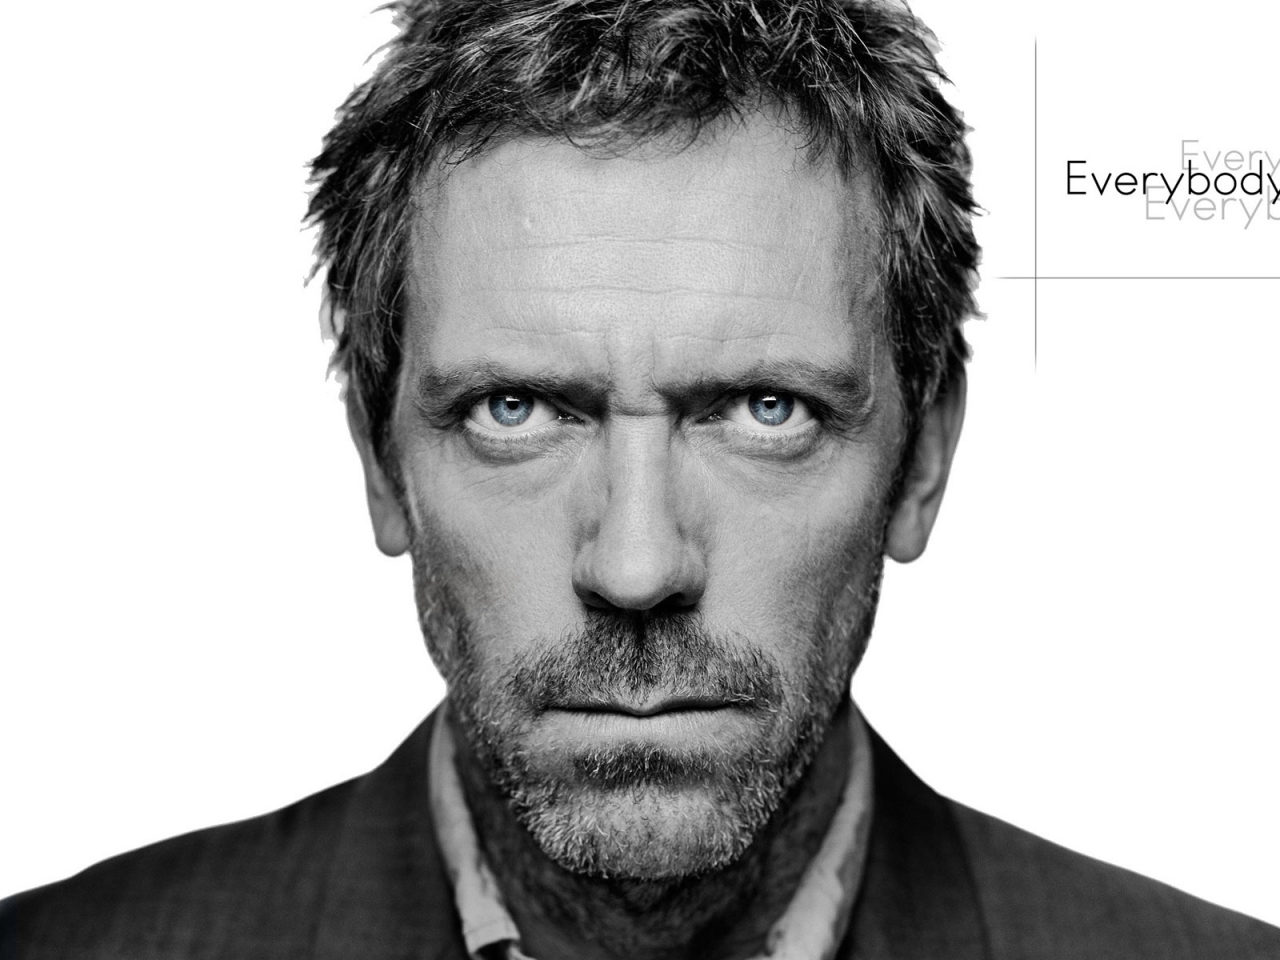 Dr House for 1280 x 960 resolution